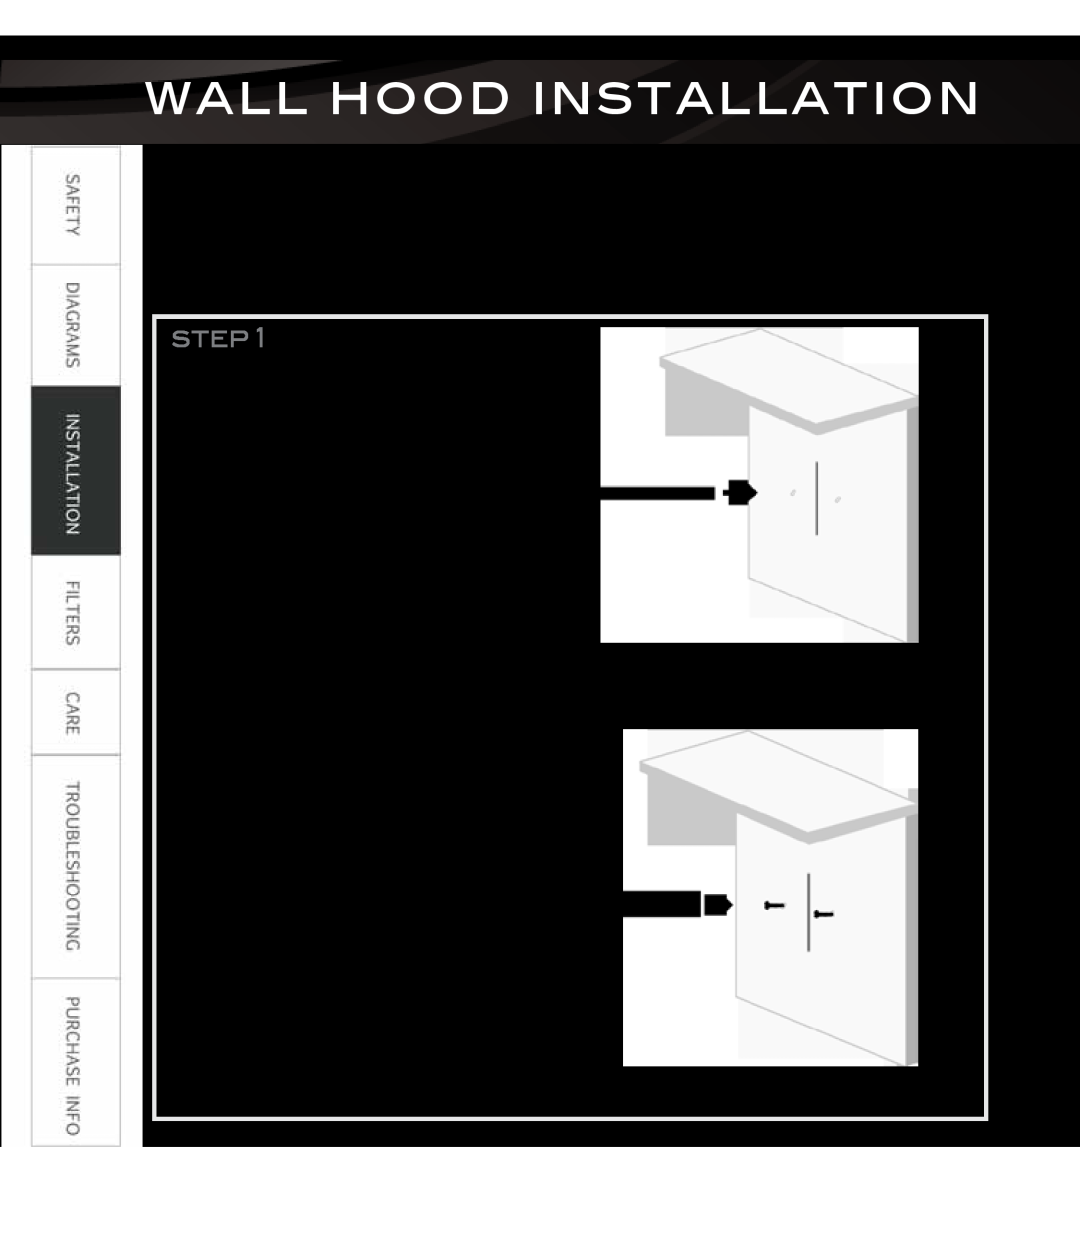 Proline PLFW544, PLFI750, PLFW812, PLFI543, PLFW543, PLFW832, PLFI544 Wall Hood Installation, Install anchors and screws 